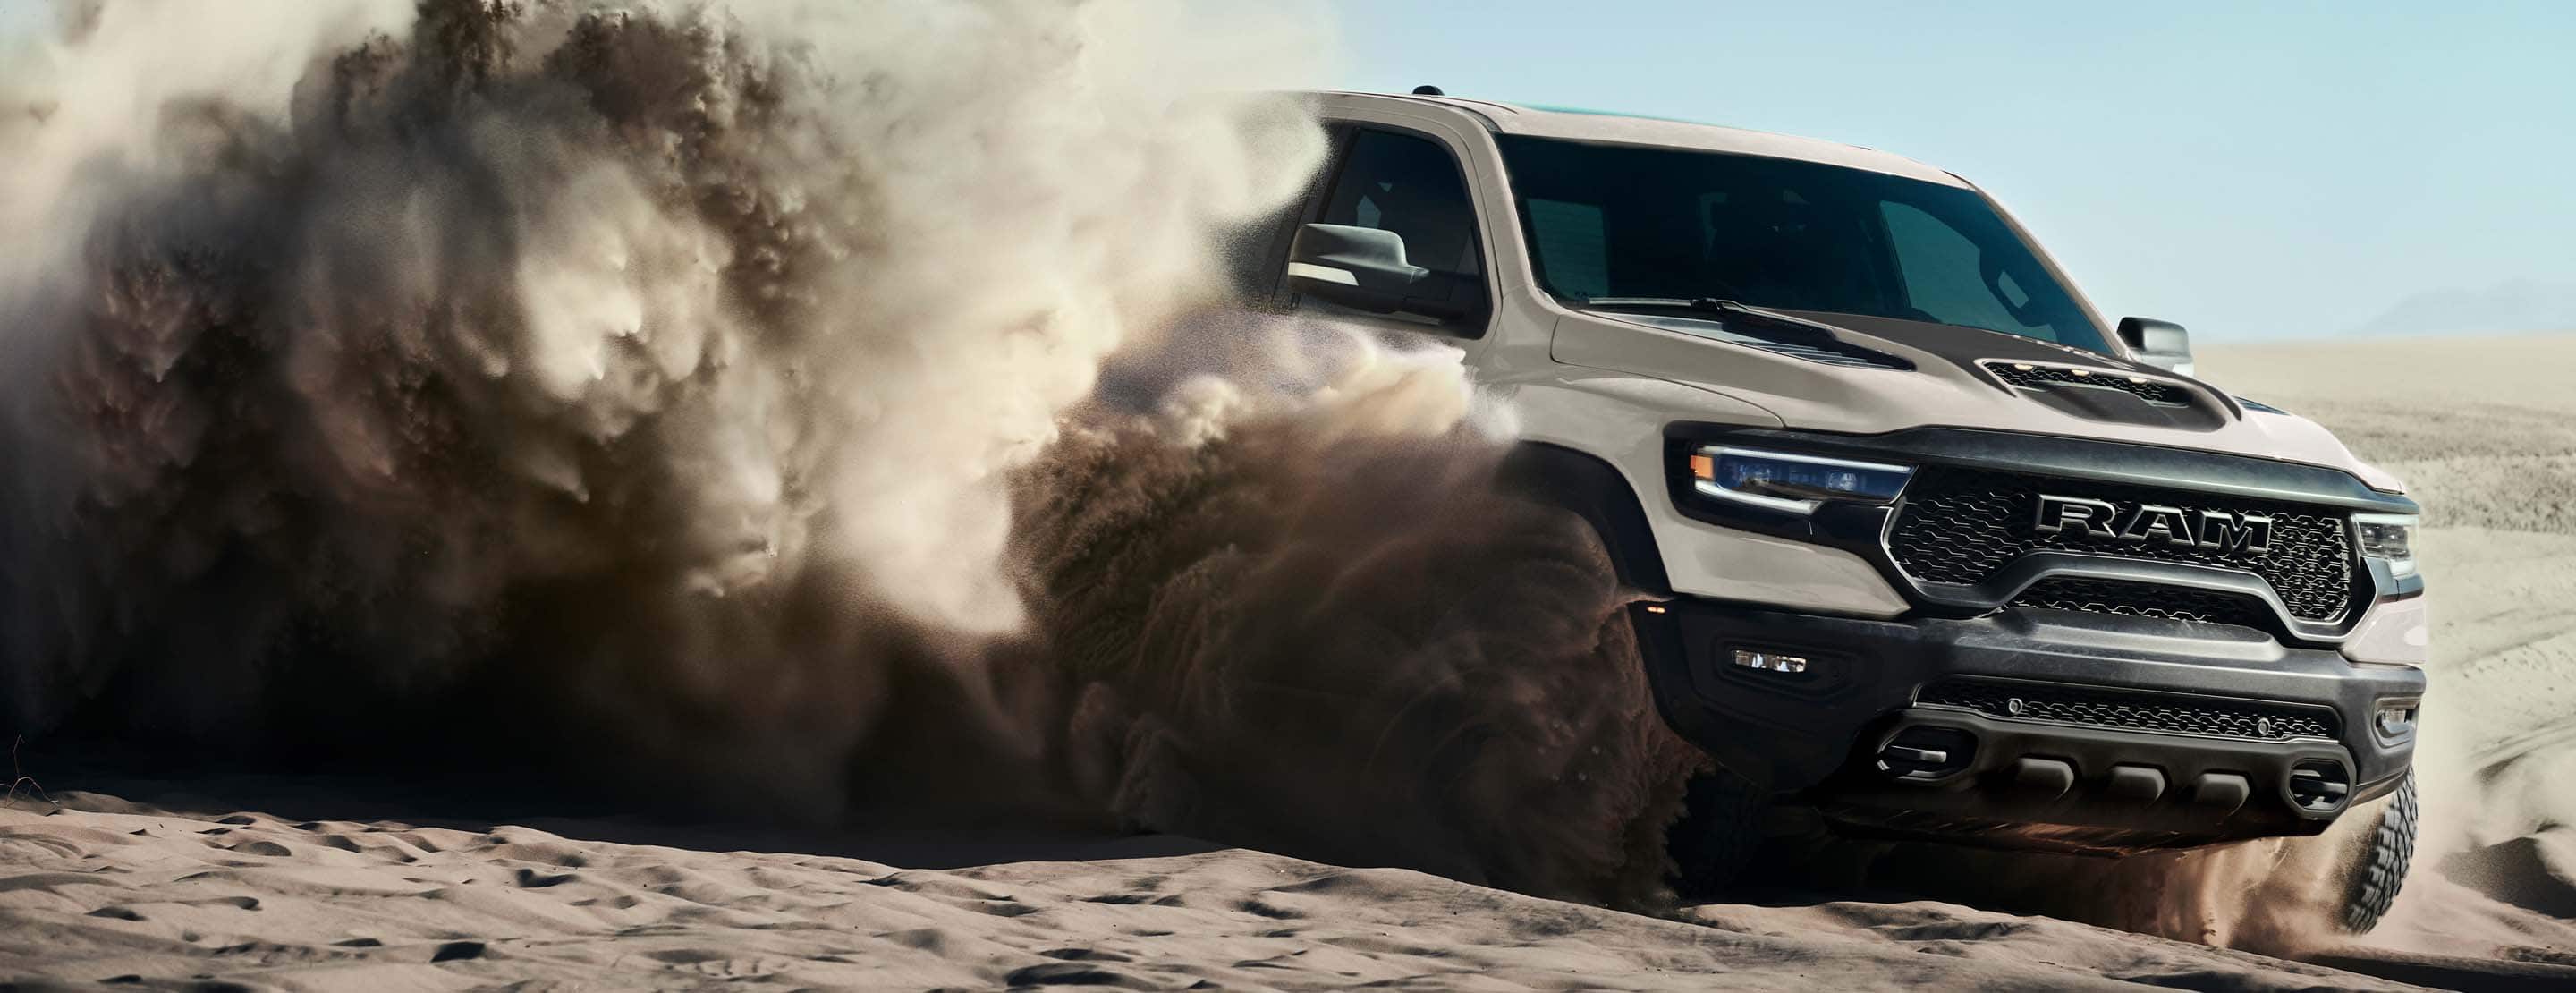 The 2022 Ram 1500 TRX Sandblast Edition being driven on sand with billowing clouds obscuring the rear of the vehicle.